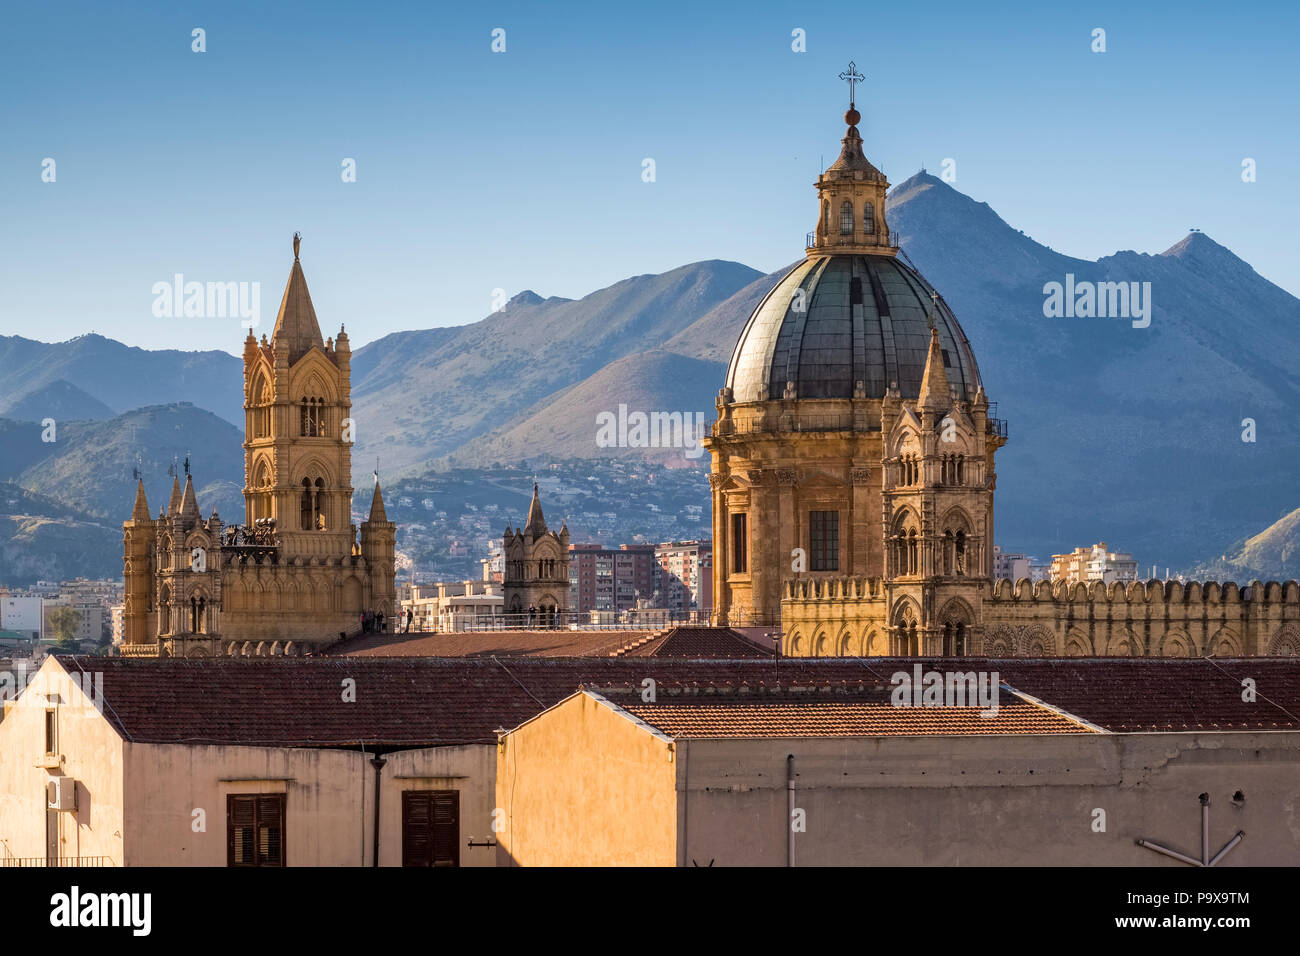 City Skyline of Palermo, Sicily, Italy, Europe, showing the dome of Palermo cathedral Stock Photo